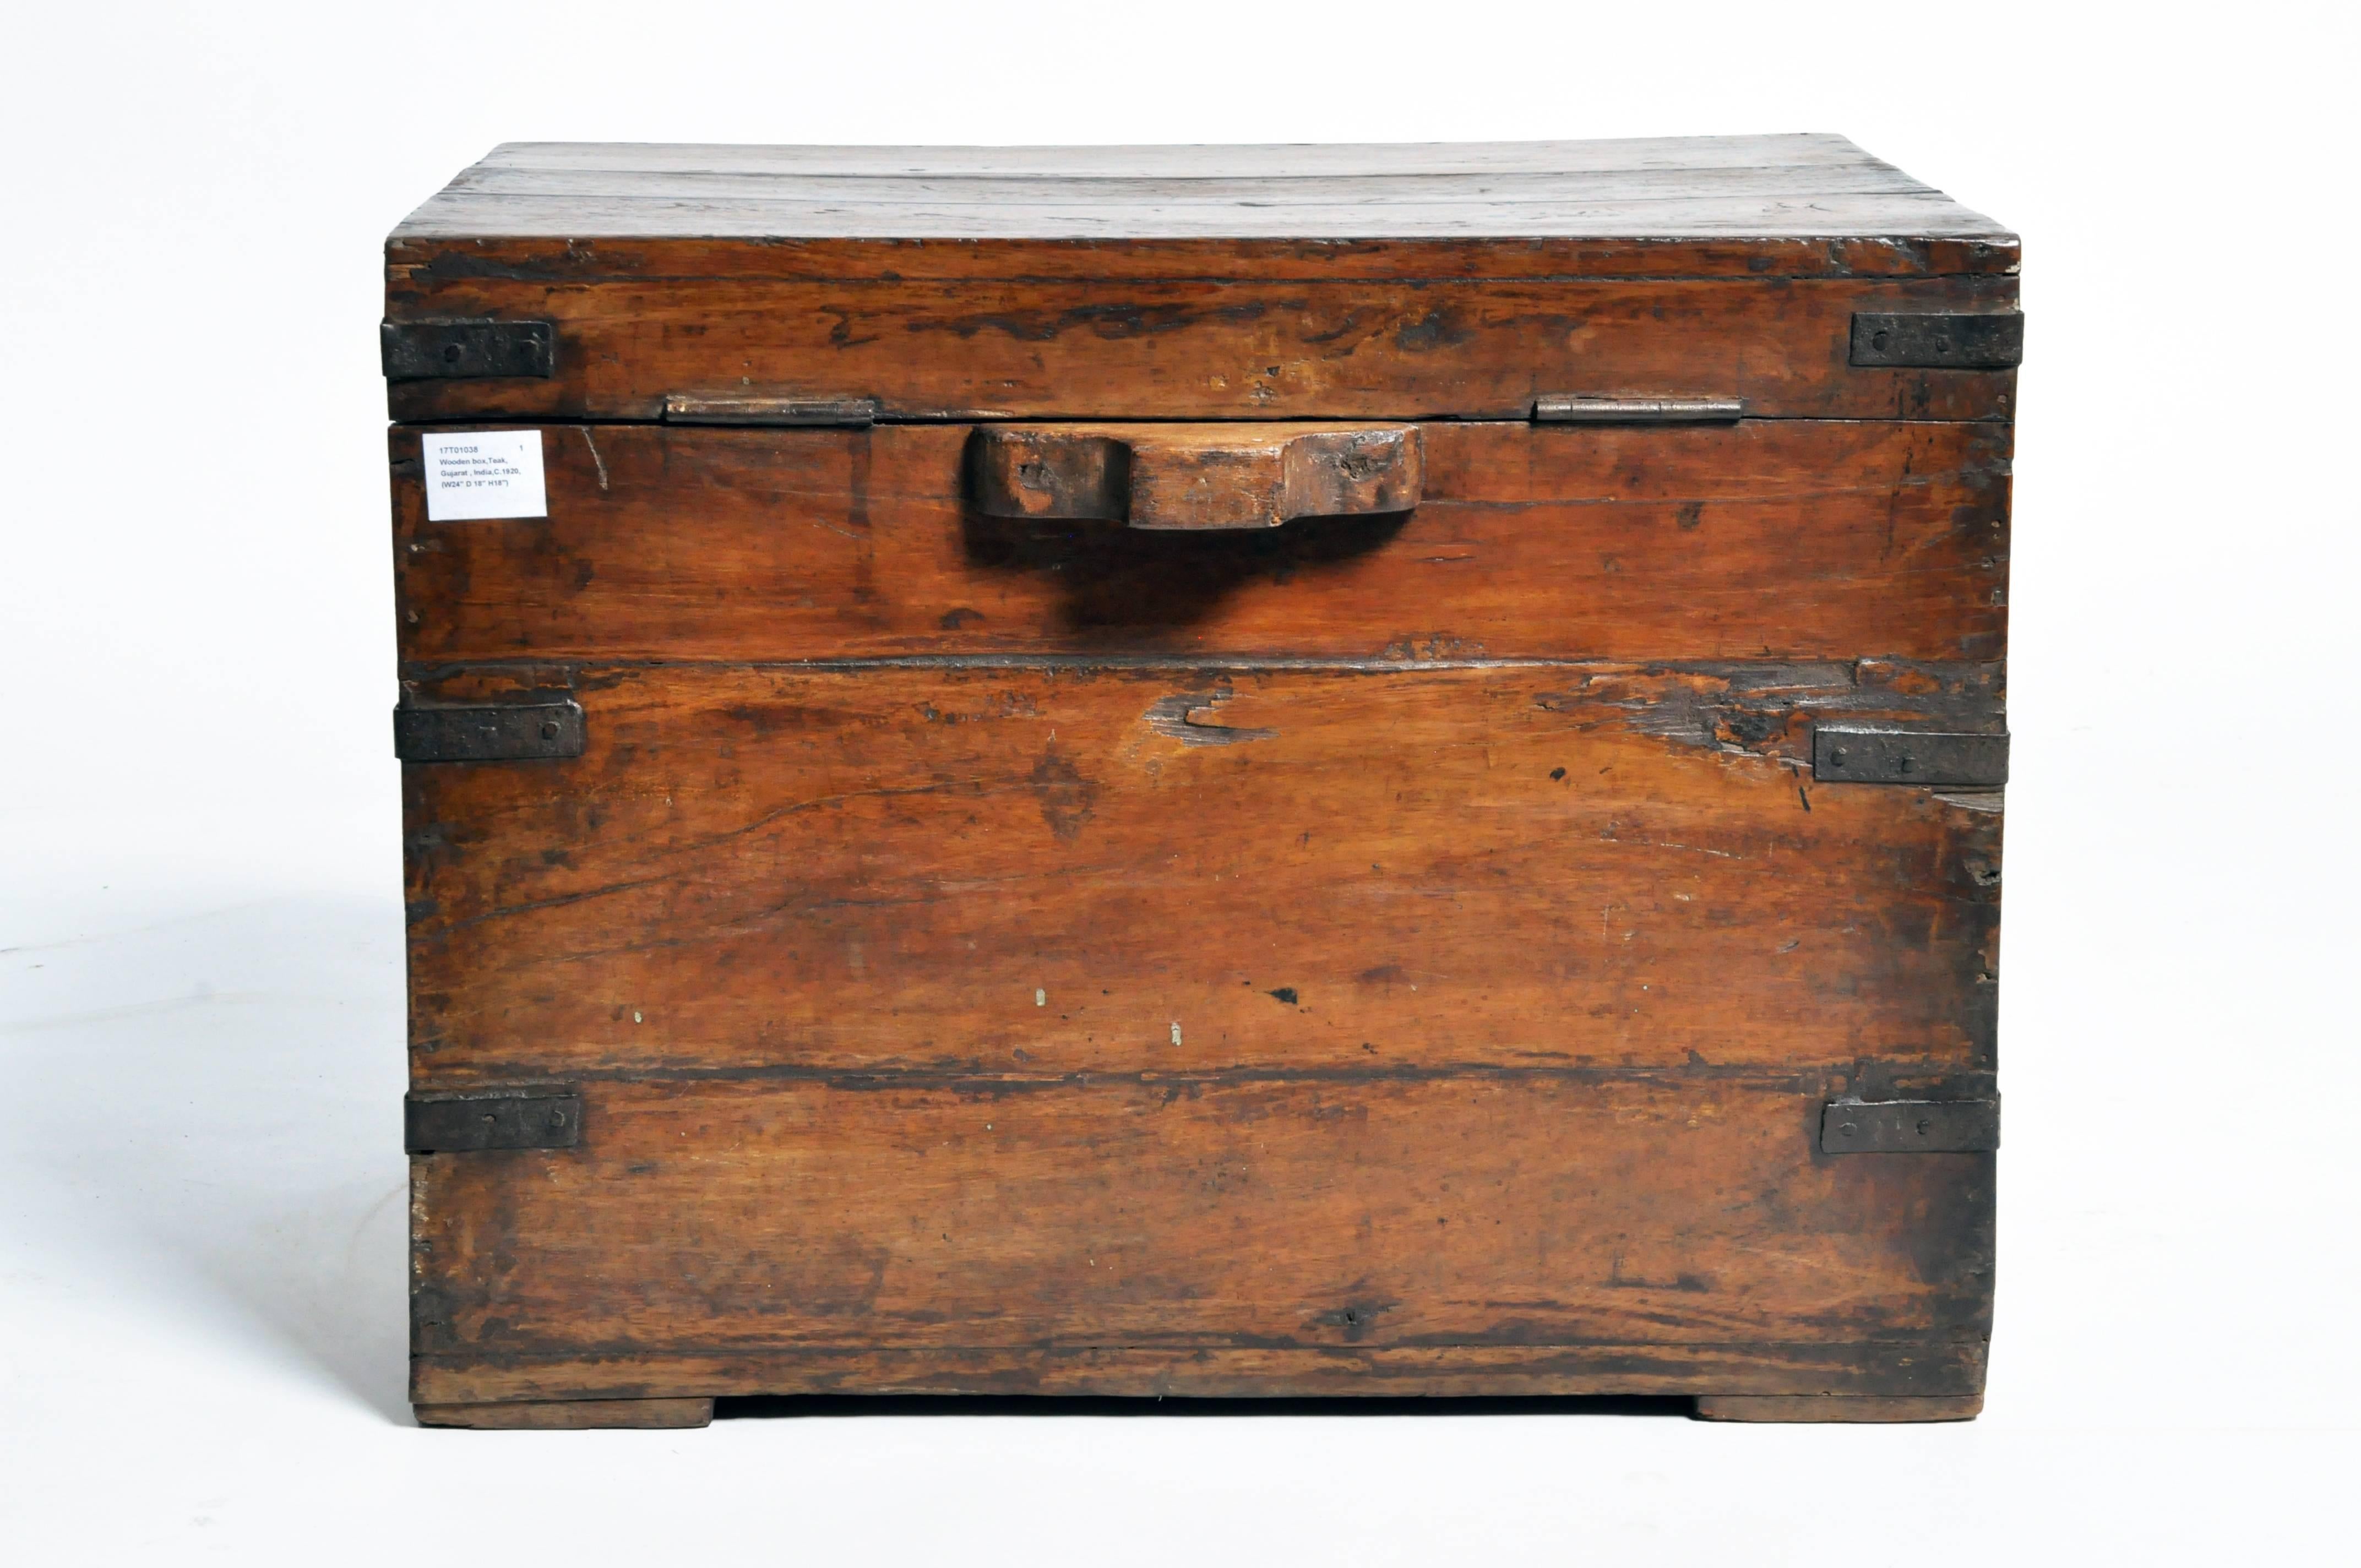 This storage box is from Gujarat, India and was made from teak wood and hand-forged iron branding, circa 1920.